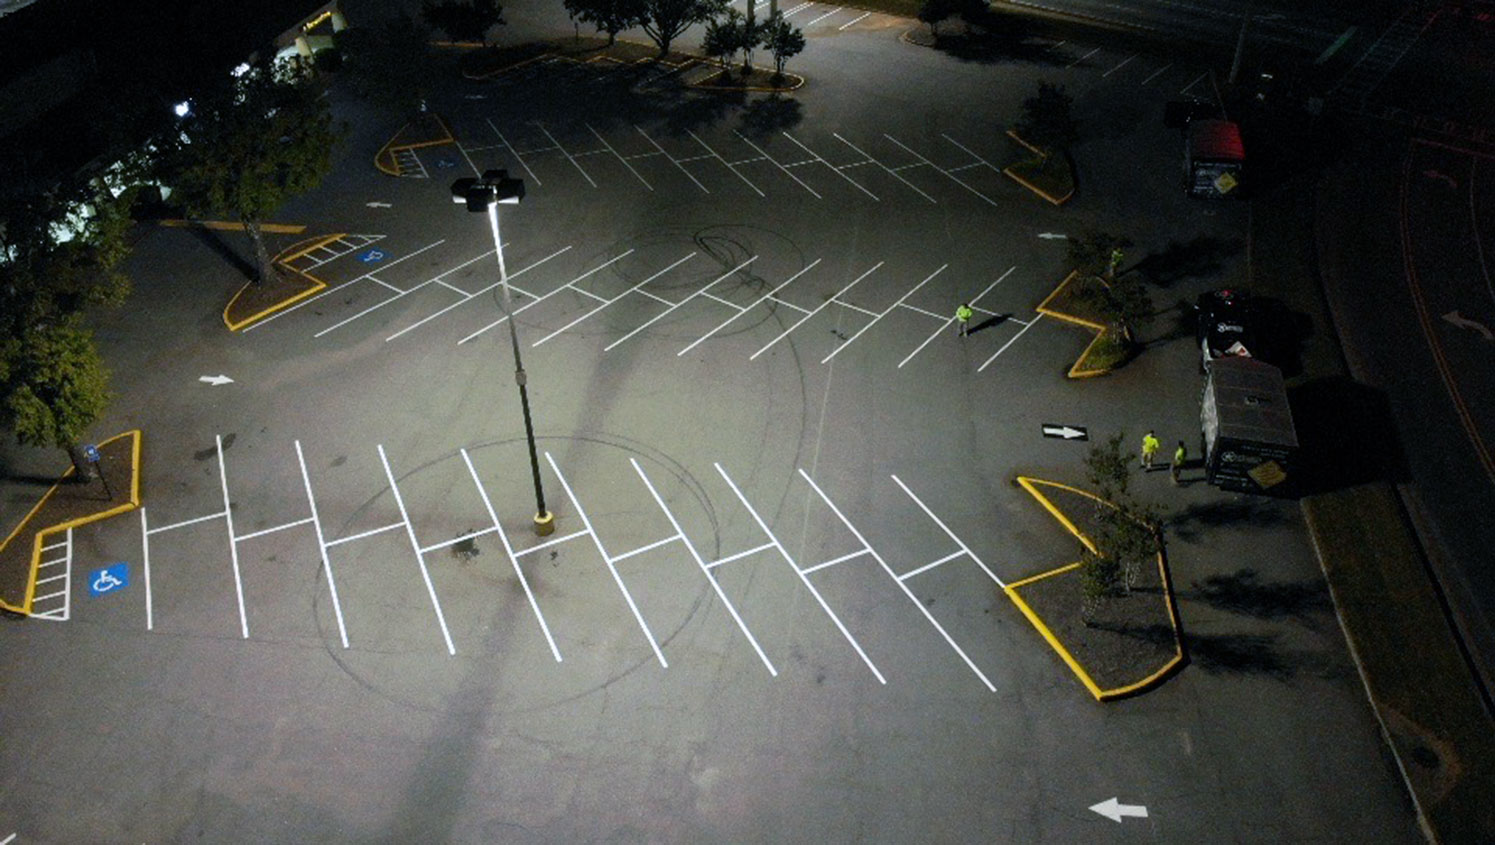 re-striped parking spaces and arrows shown from above